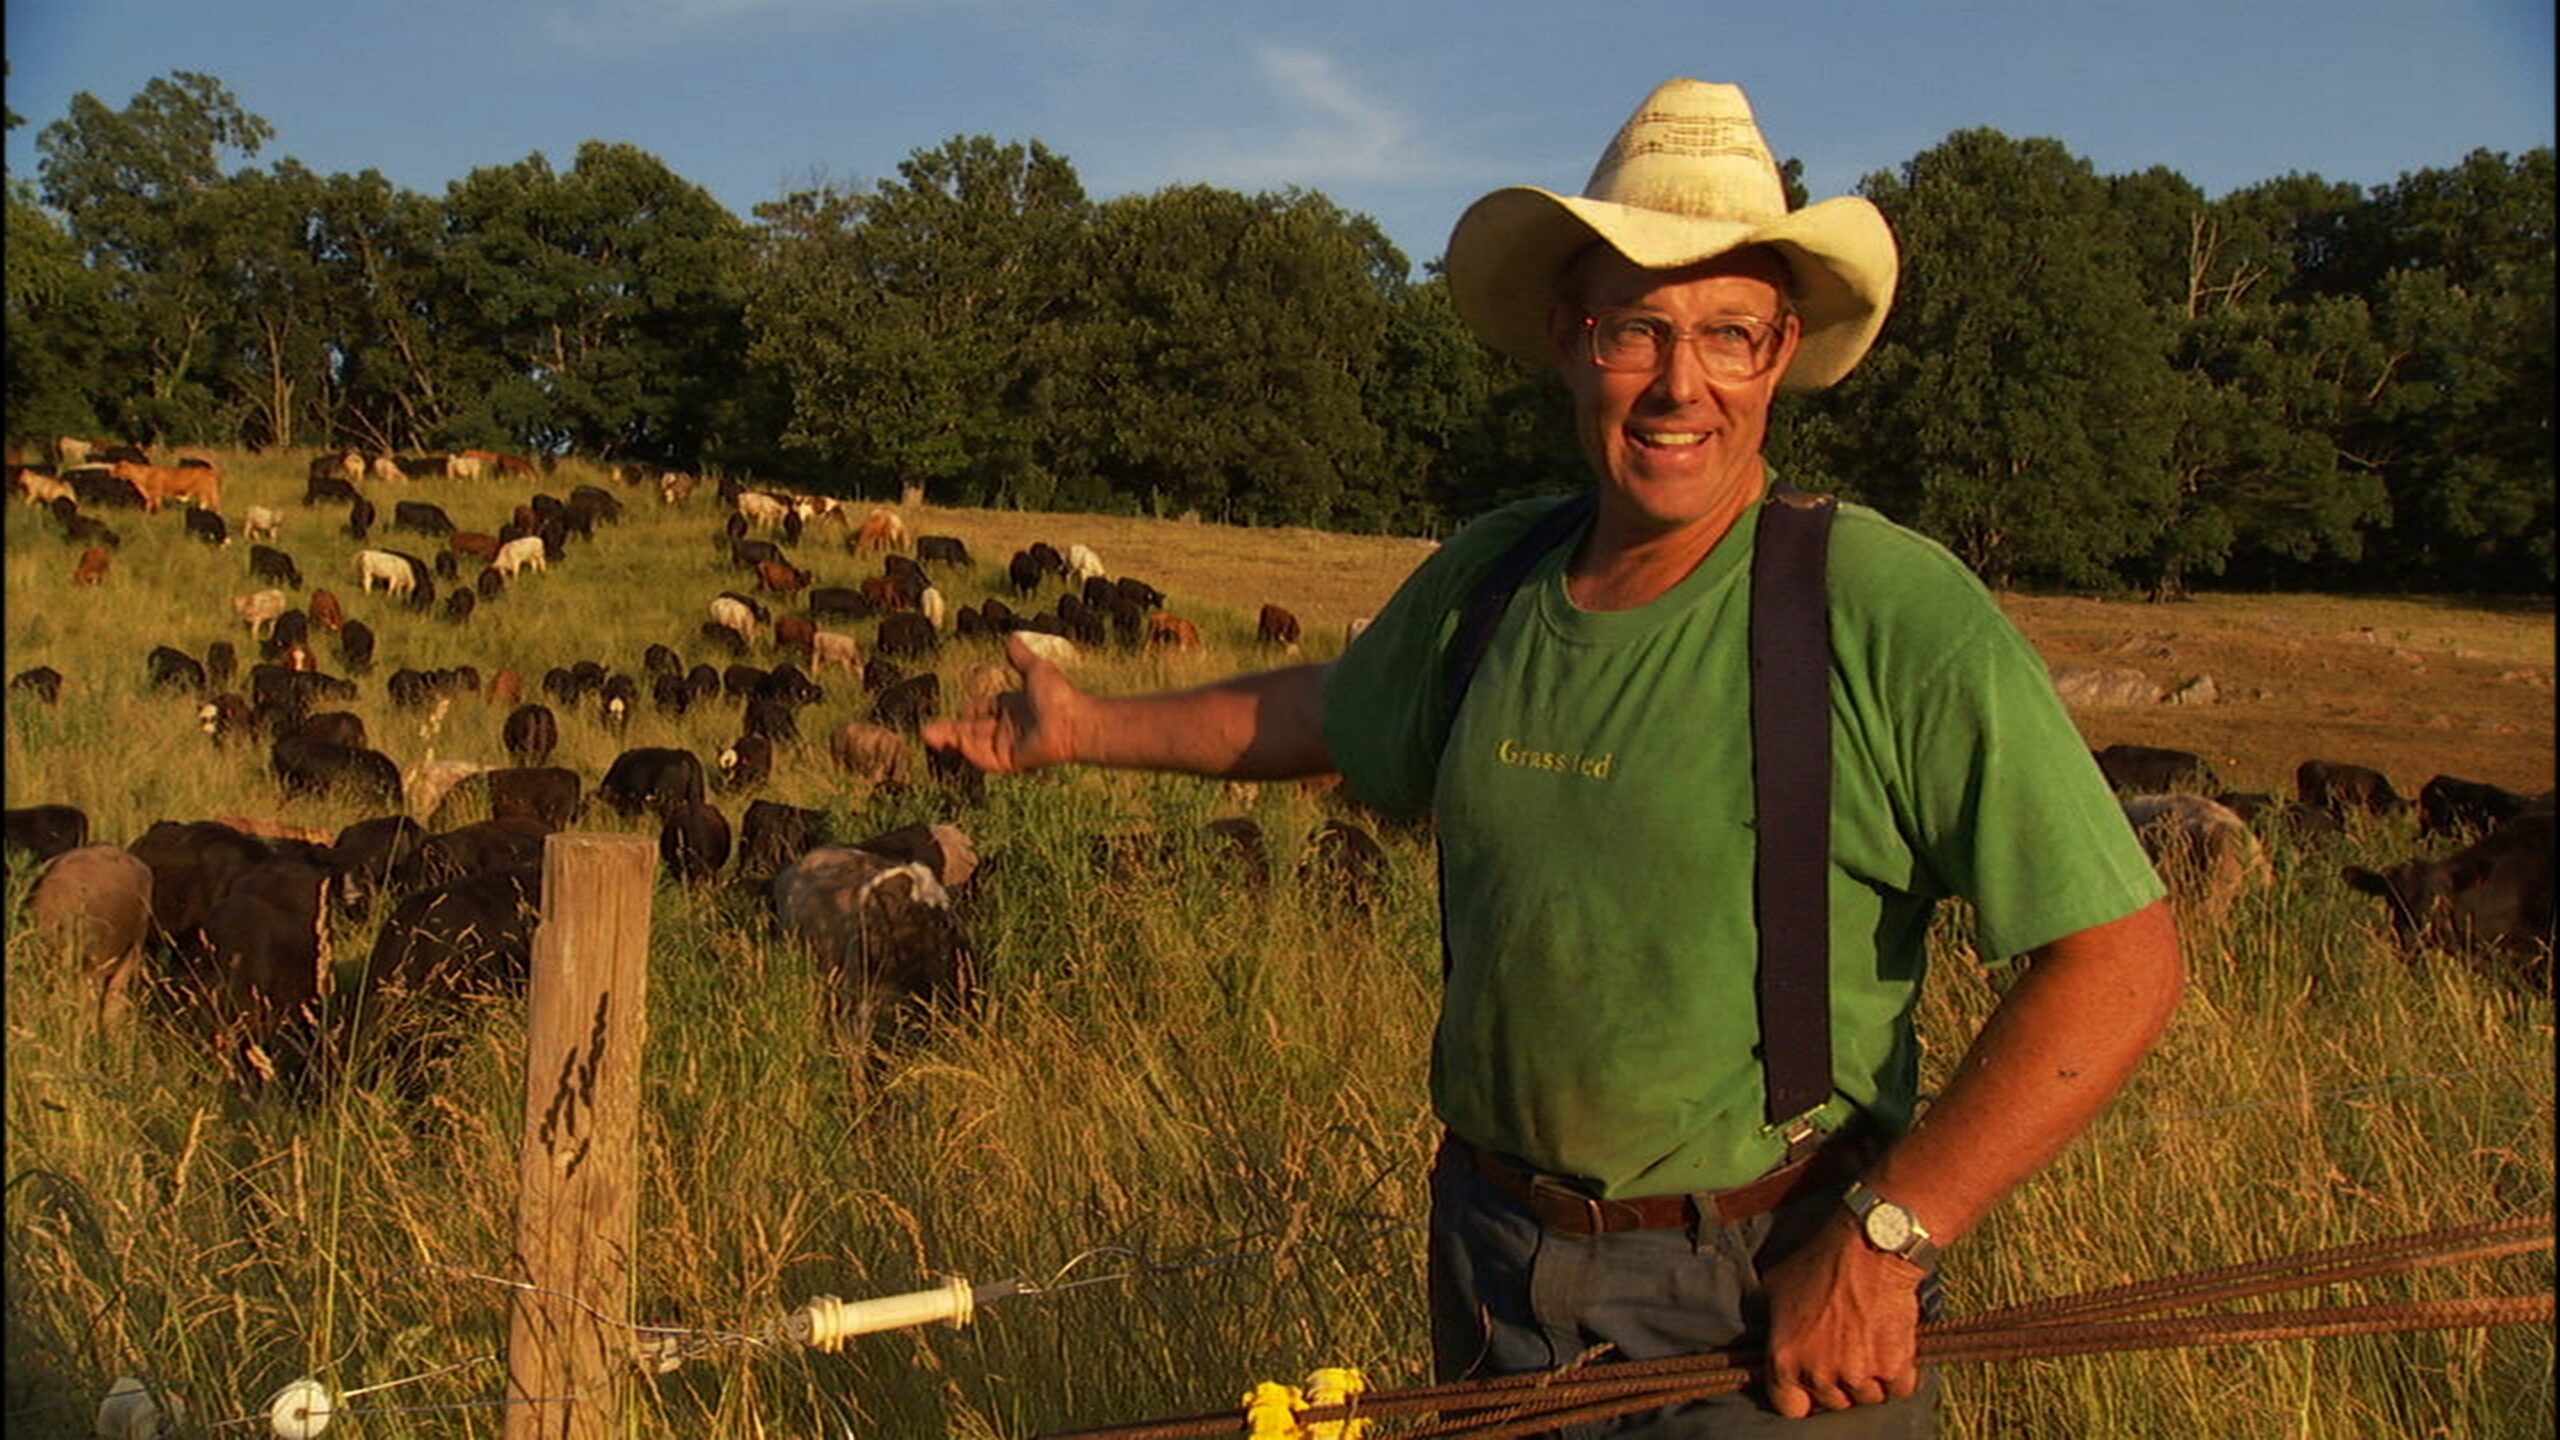 Rob Bauer ditched chemicals for organic farming to save his health.